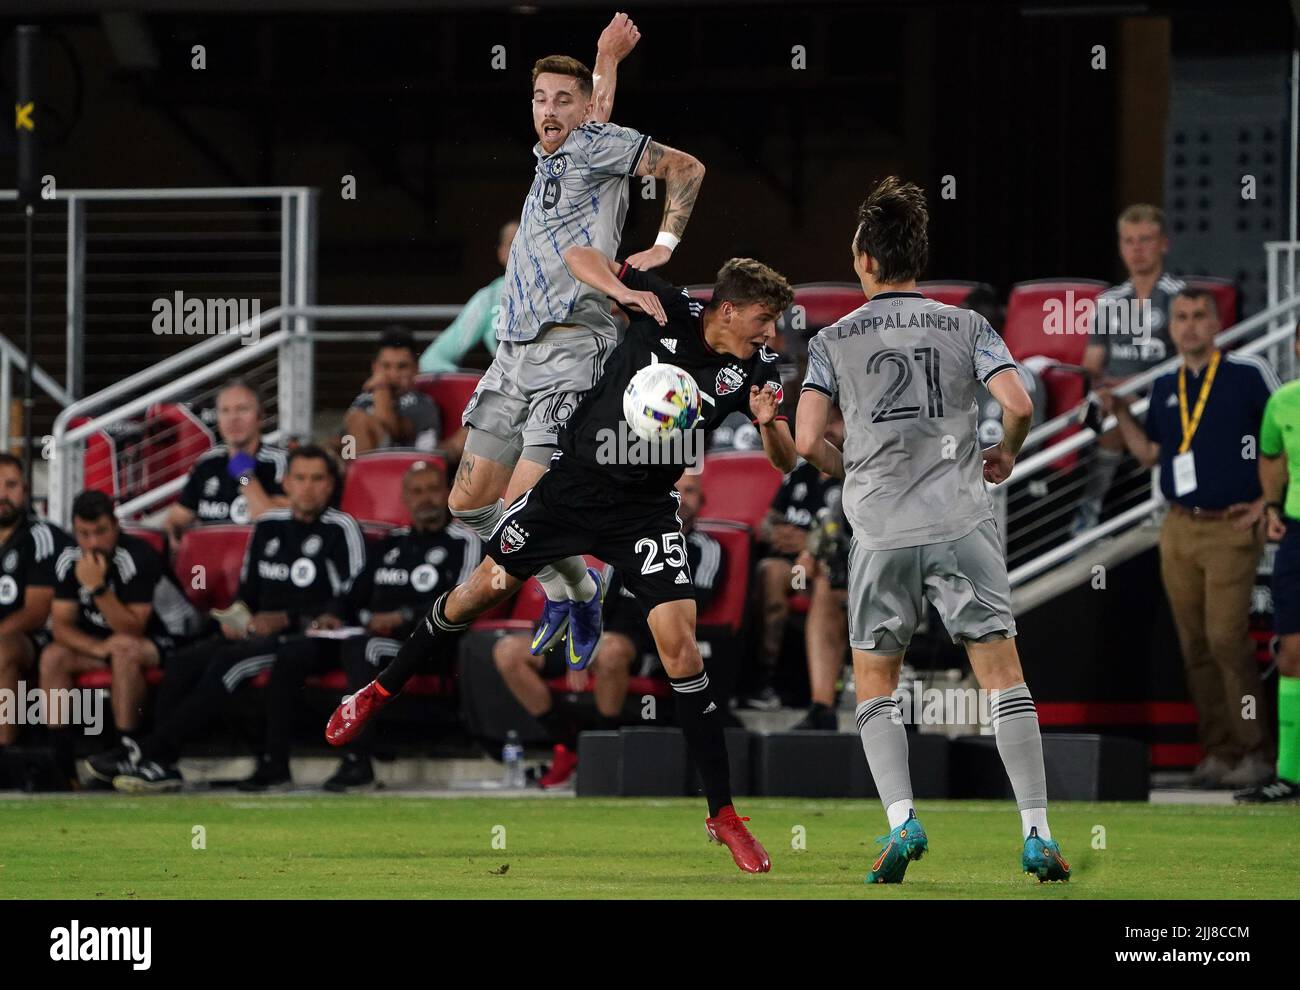 WASHINGTON, DC, USA - 23 JULY 2022: CF Montréal defender Joel Waterman (16) heads down over D.C. United midfielder Jackson Hopkins (25) during a MLS match between D.C United and C.F. Montreal, on July 23, 2022, at Audi Field, in Washington, DC. (Photo by Tony Quinn-Alamy Live News) Stock Photo